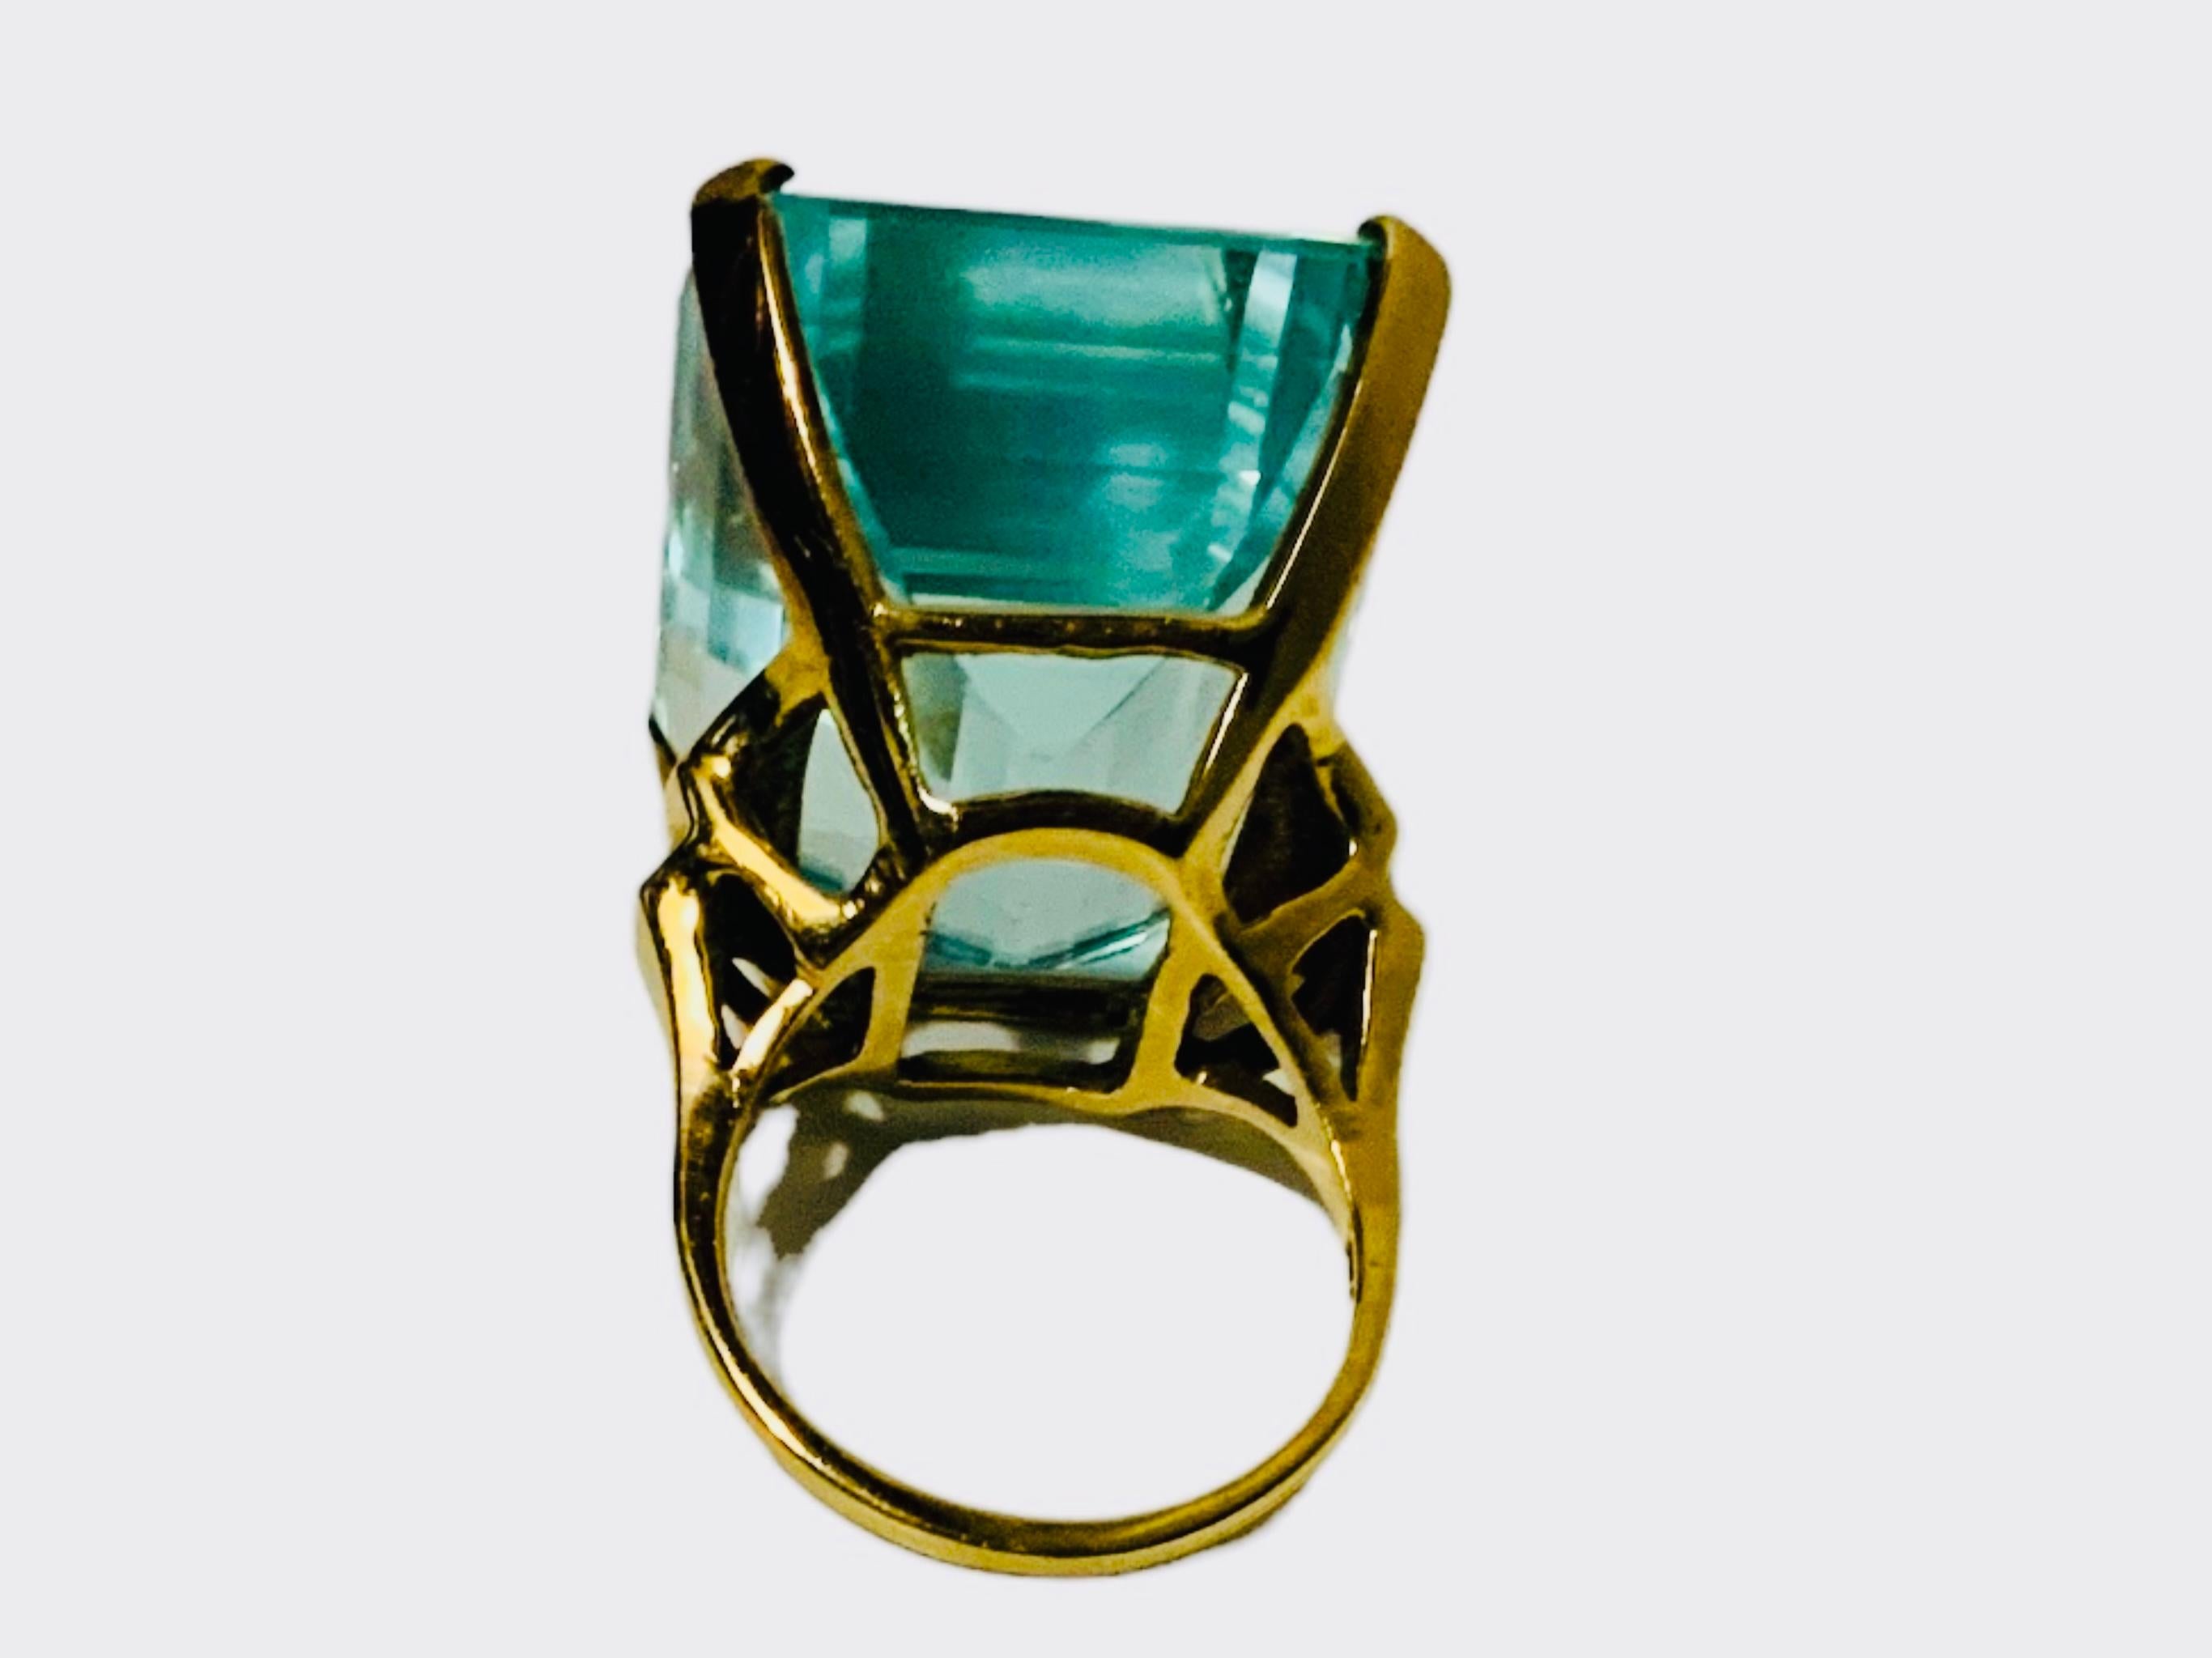 14K Gold Emerald Cut Aquamarine Cocktail Ring In Fair Condition For Sale In Guaynabo, PR